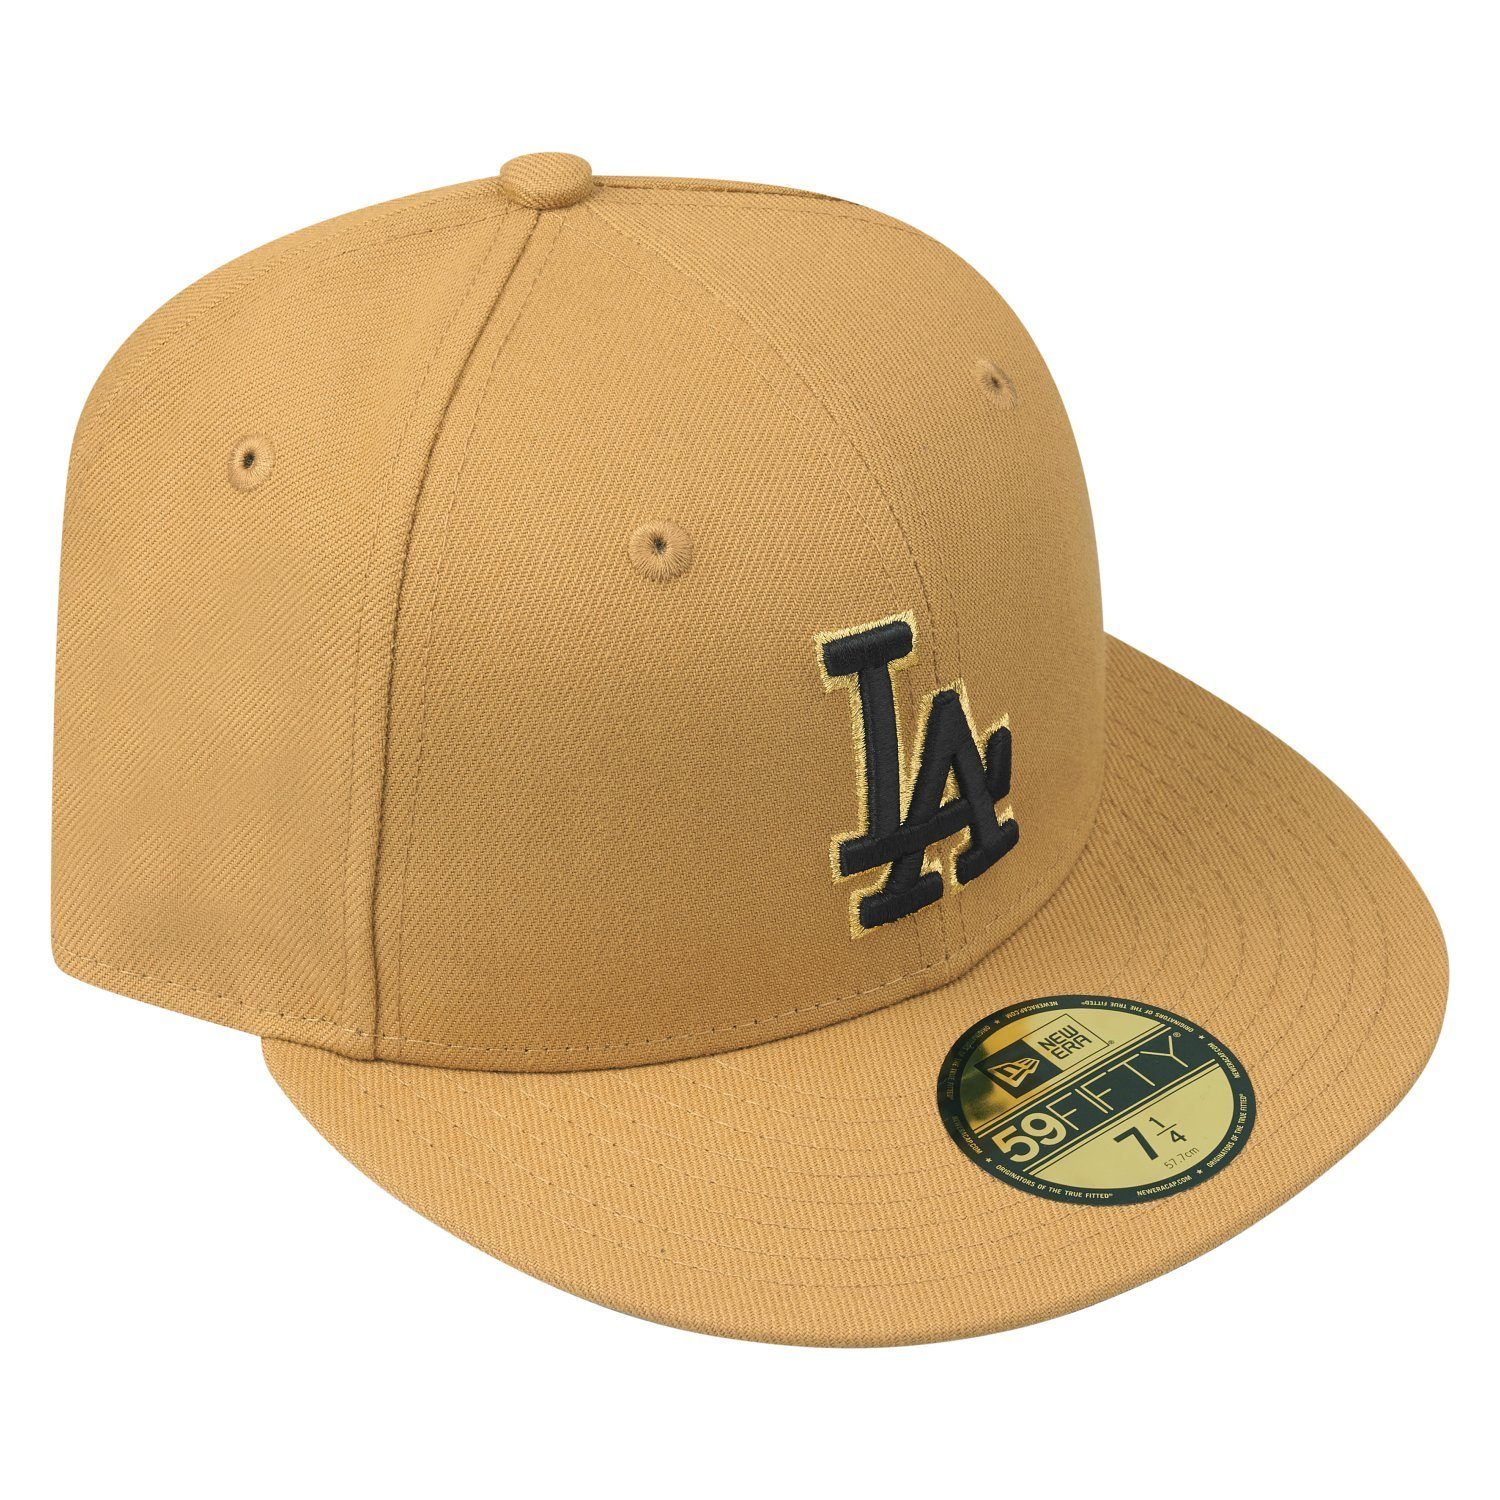 59Fifty Dodgers Era Los Angeles New Cap panama Fitted